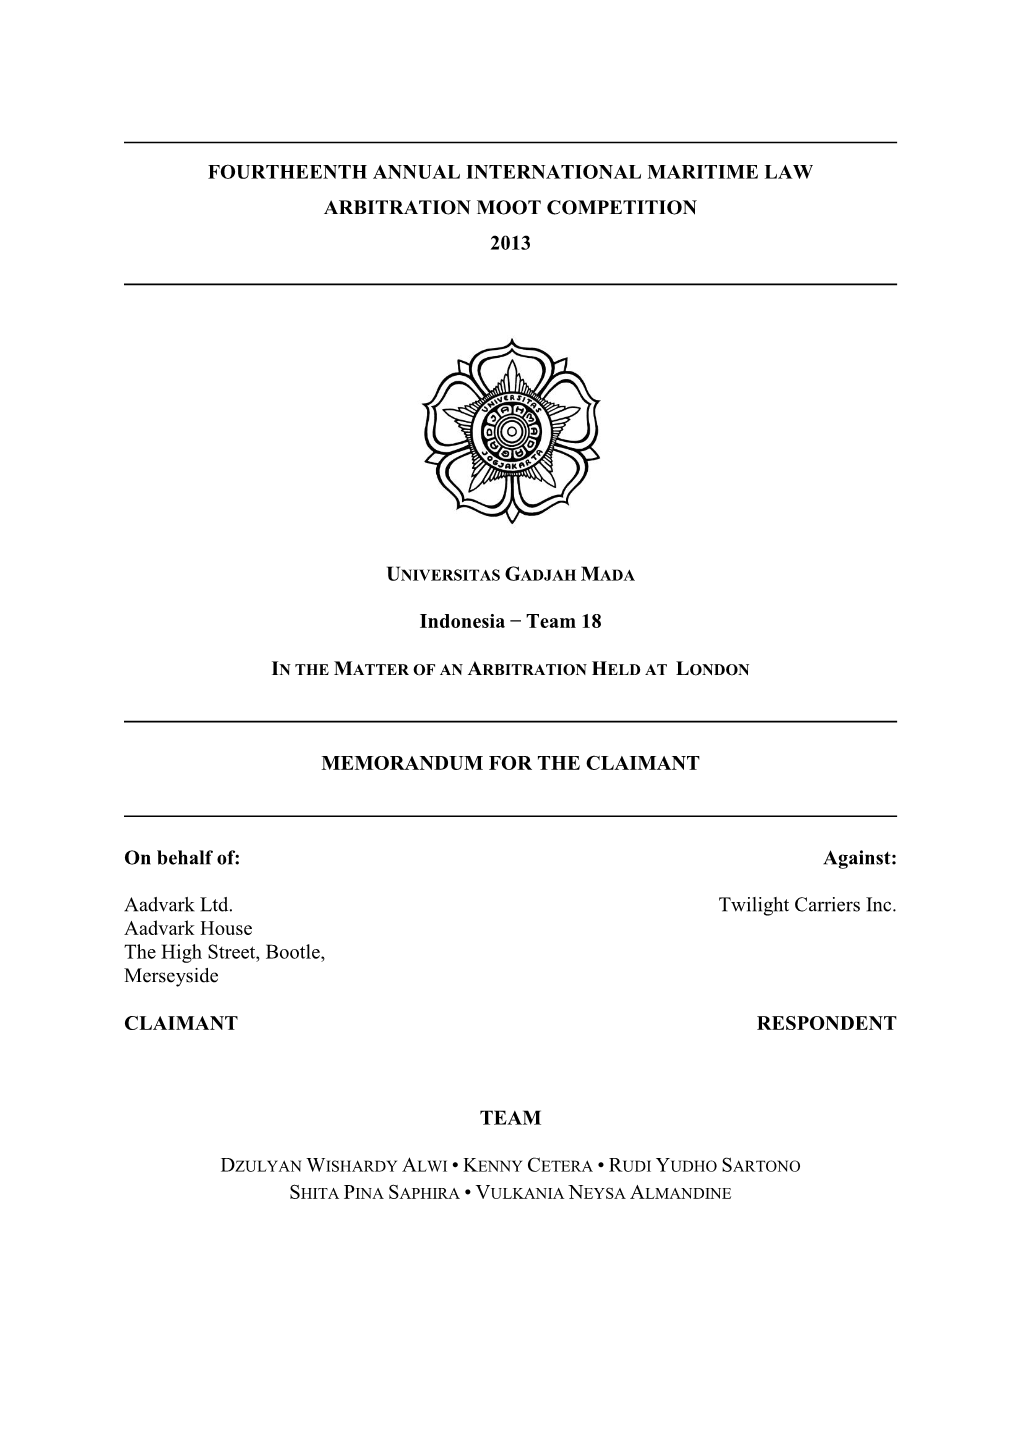 FOURTHEENTH ANNUAL INTERNATIONAL MARITIME LAW ARBITRATION MOOT COMPETITION 2013 MEMORANDUM for the CLAIMANT on Behalf Of: Aadv